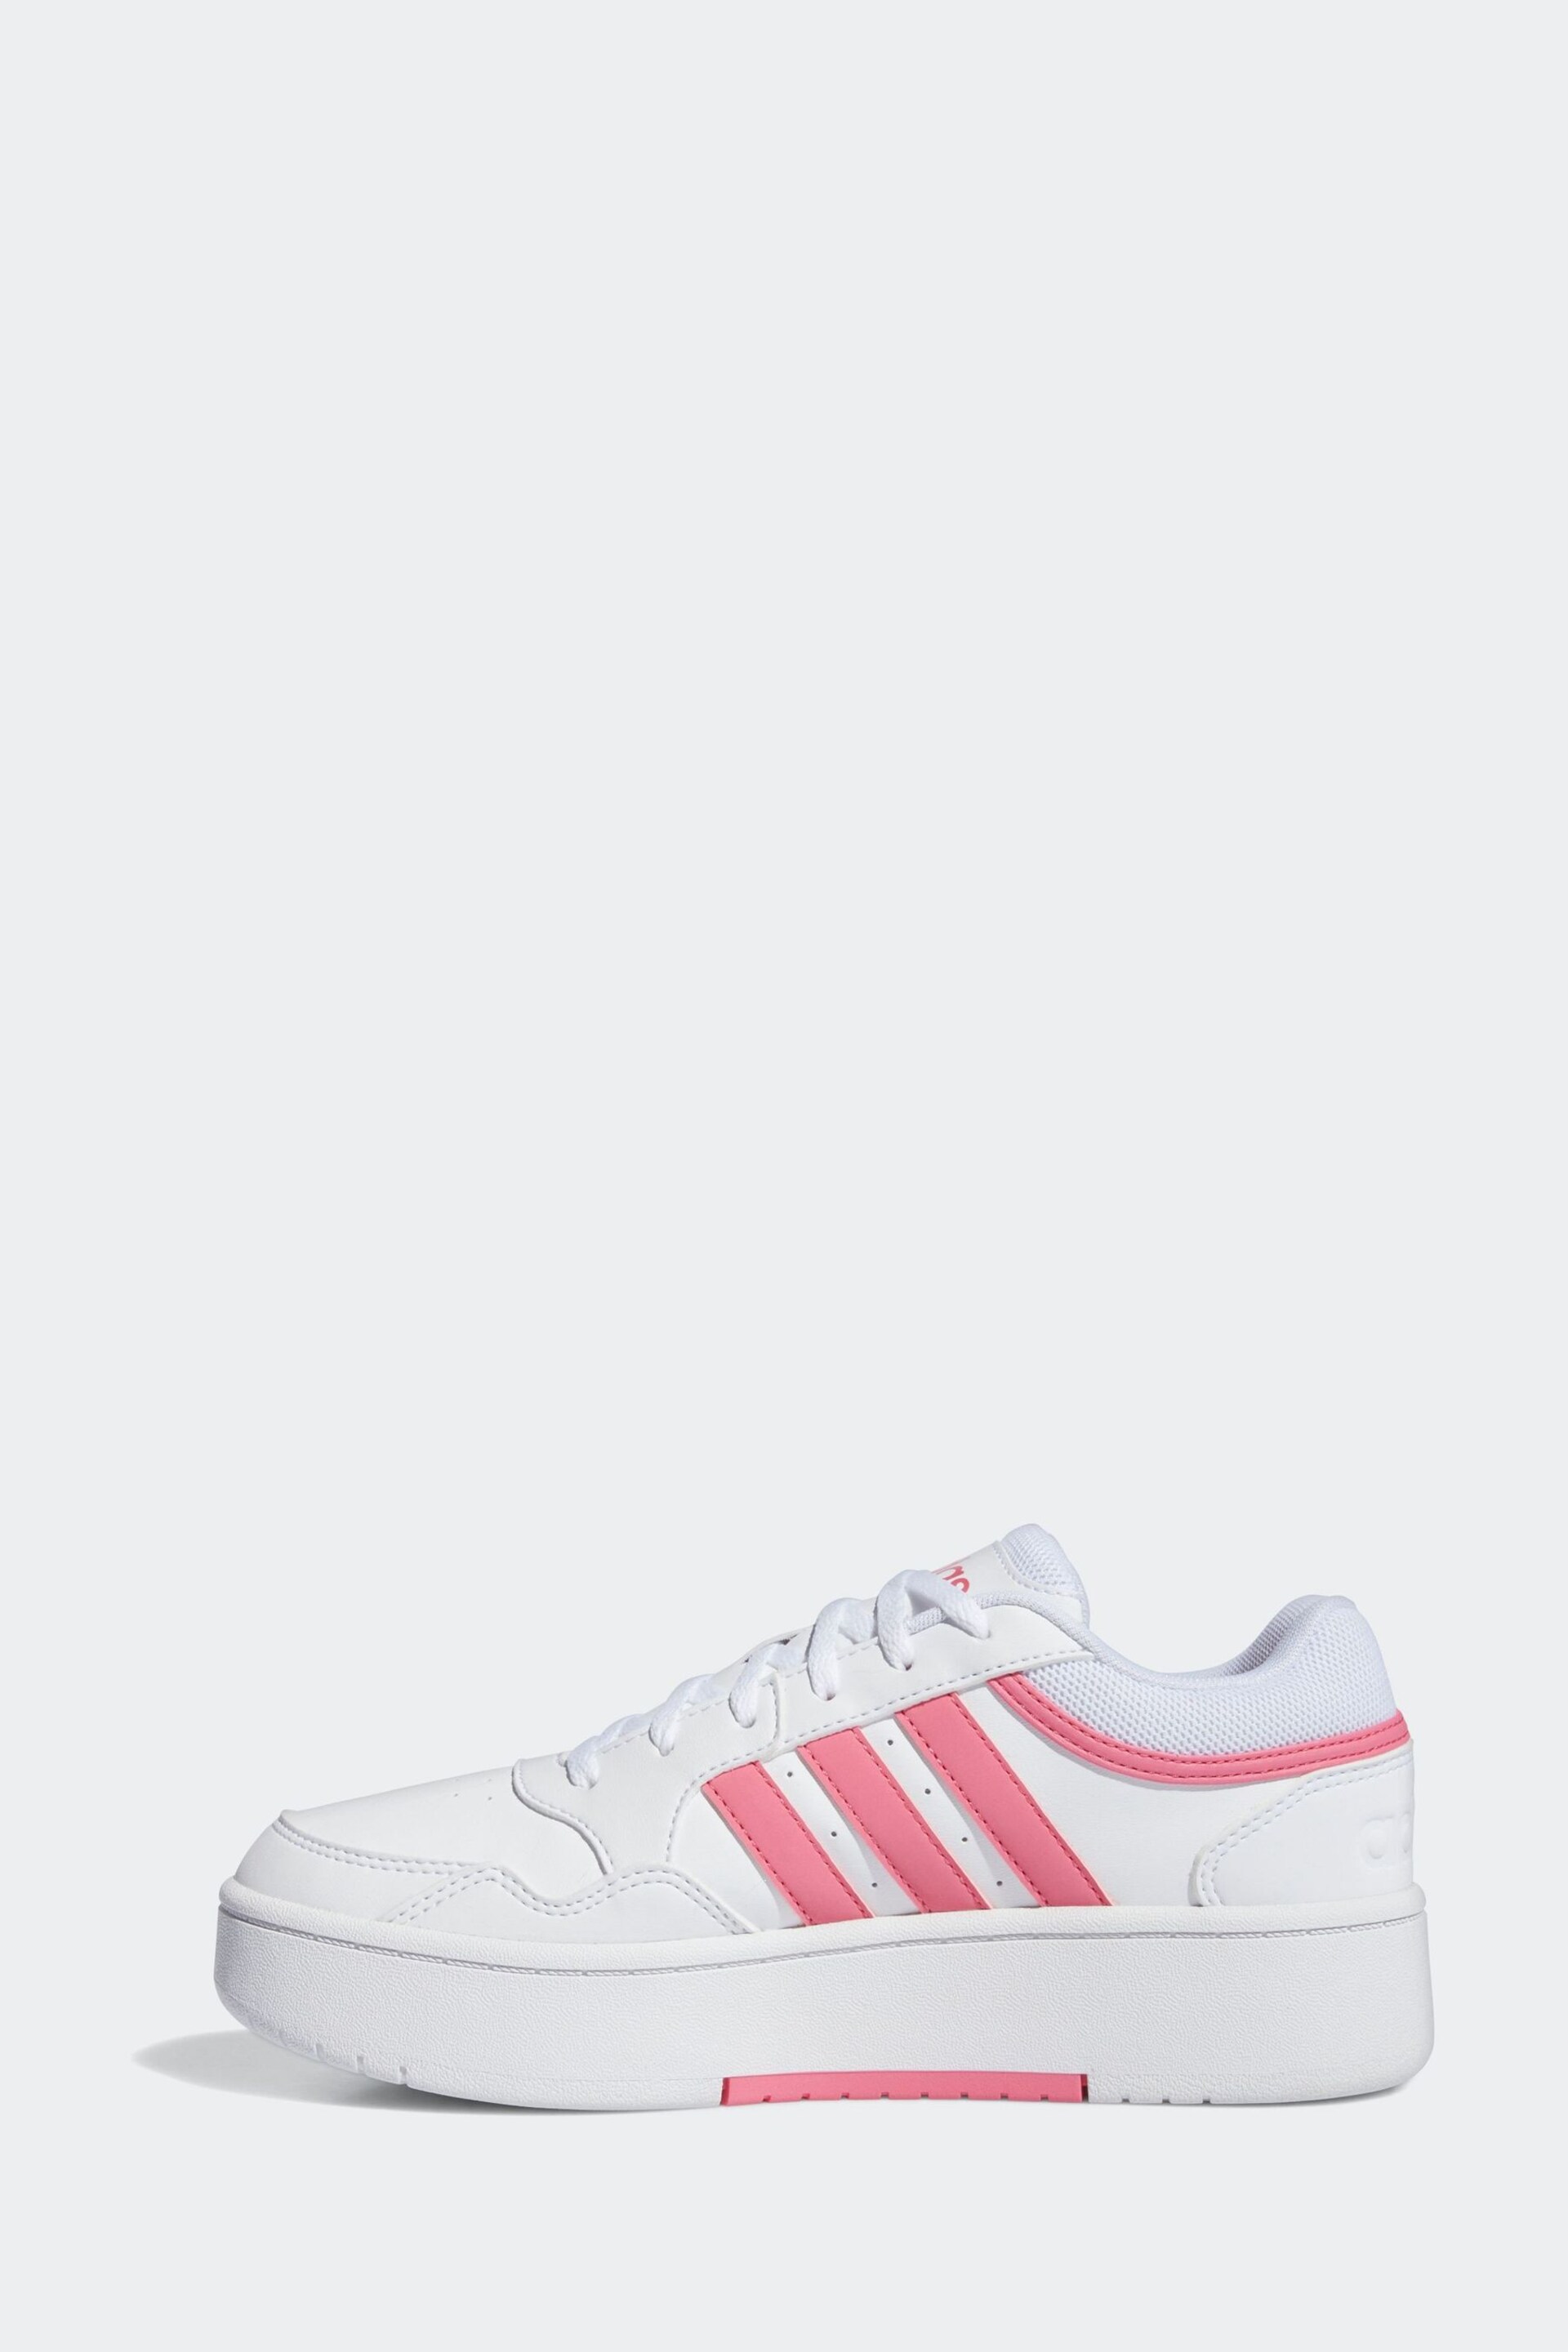 adidas Originals White/Pink Hoops 3.0 Bold Trainers - Image 3 of 9